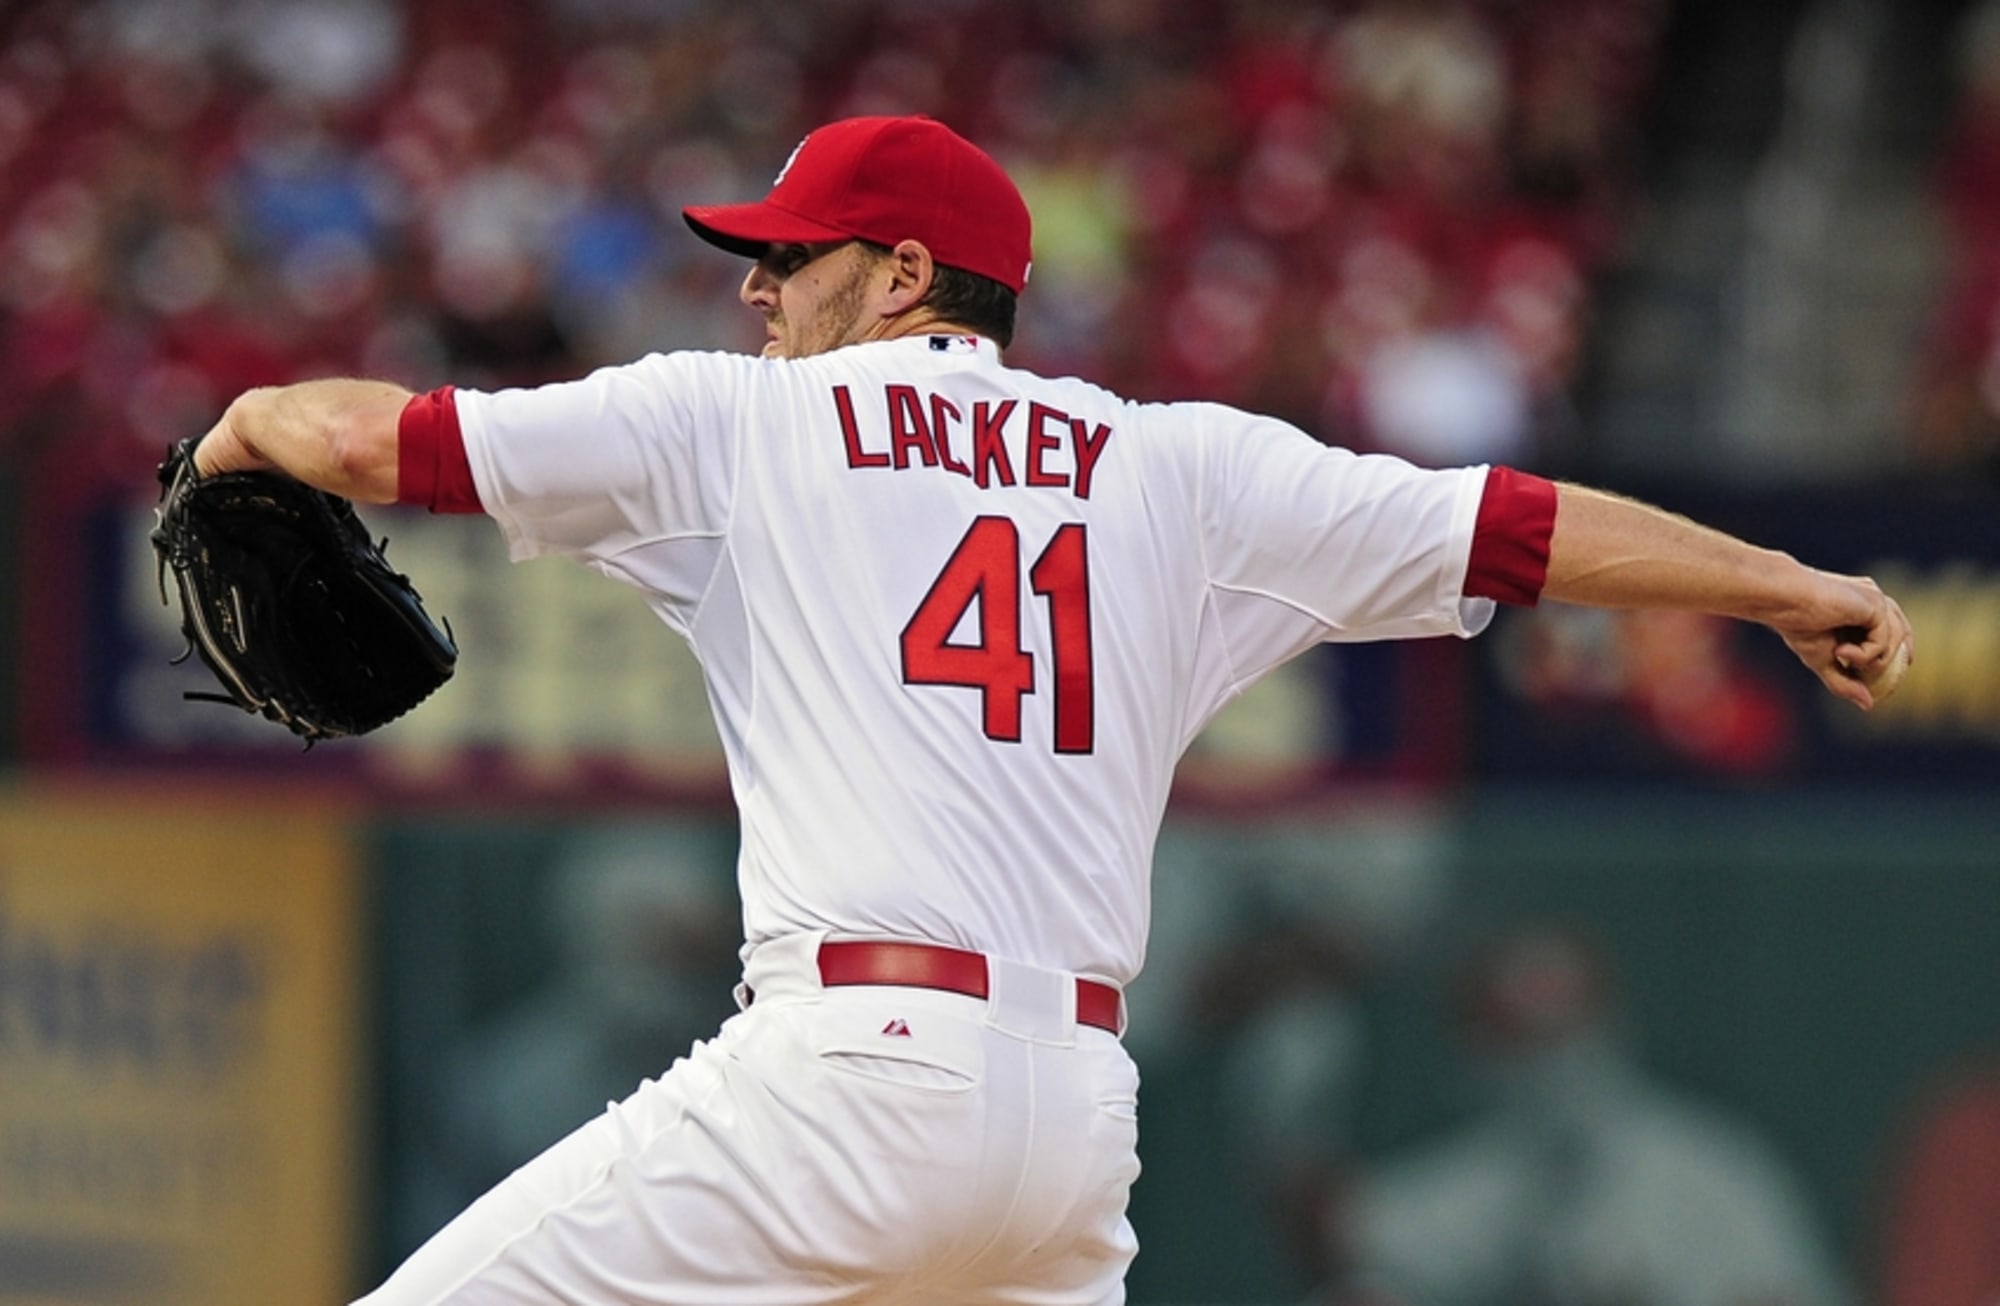 John Lackey gave up signed Babe Ruth ball for jersey number